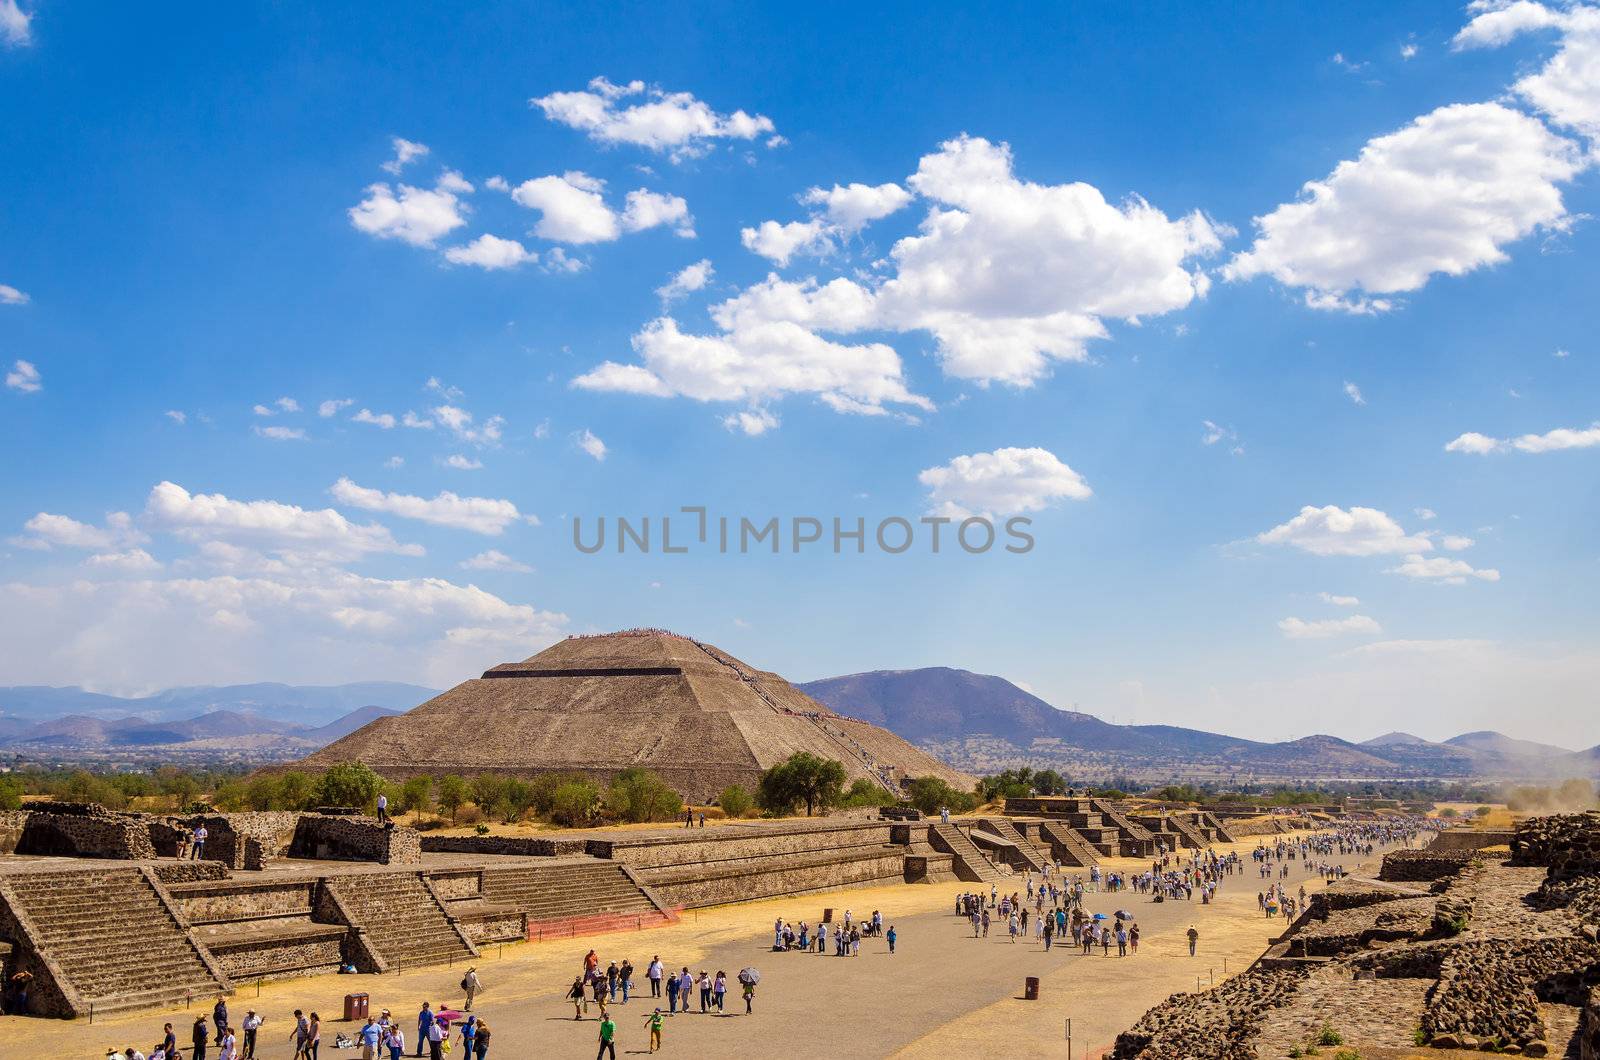 View of the Pyramid of the Sun and the Avenue of the Dead in Teotihuacan, Mexico